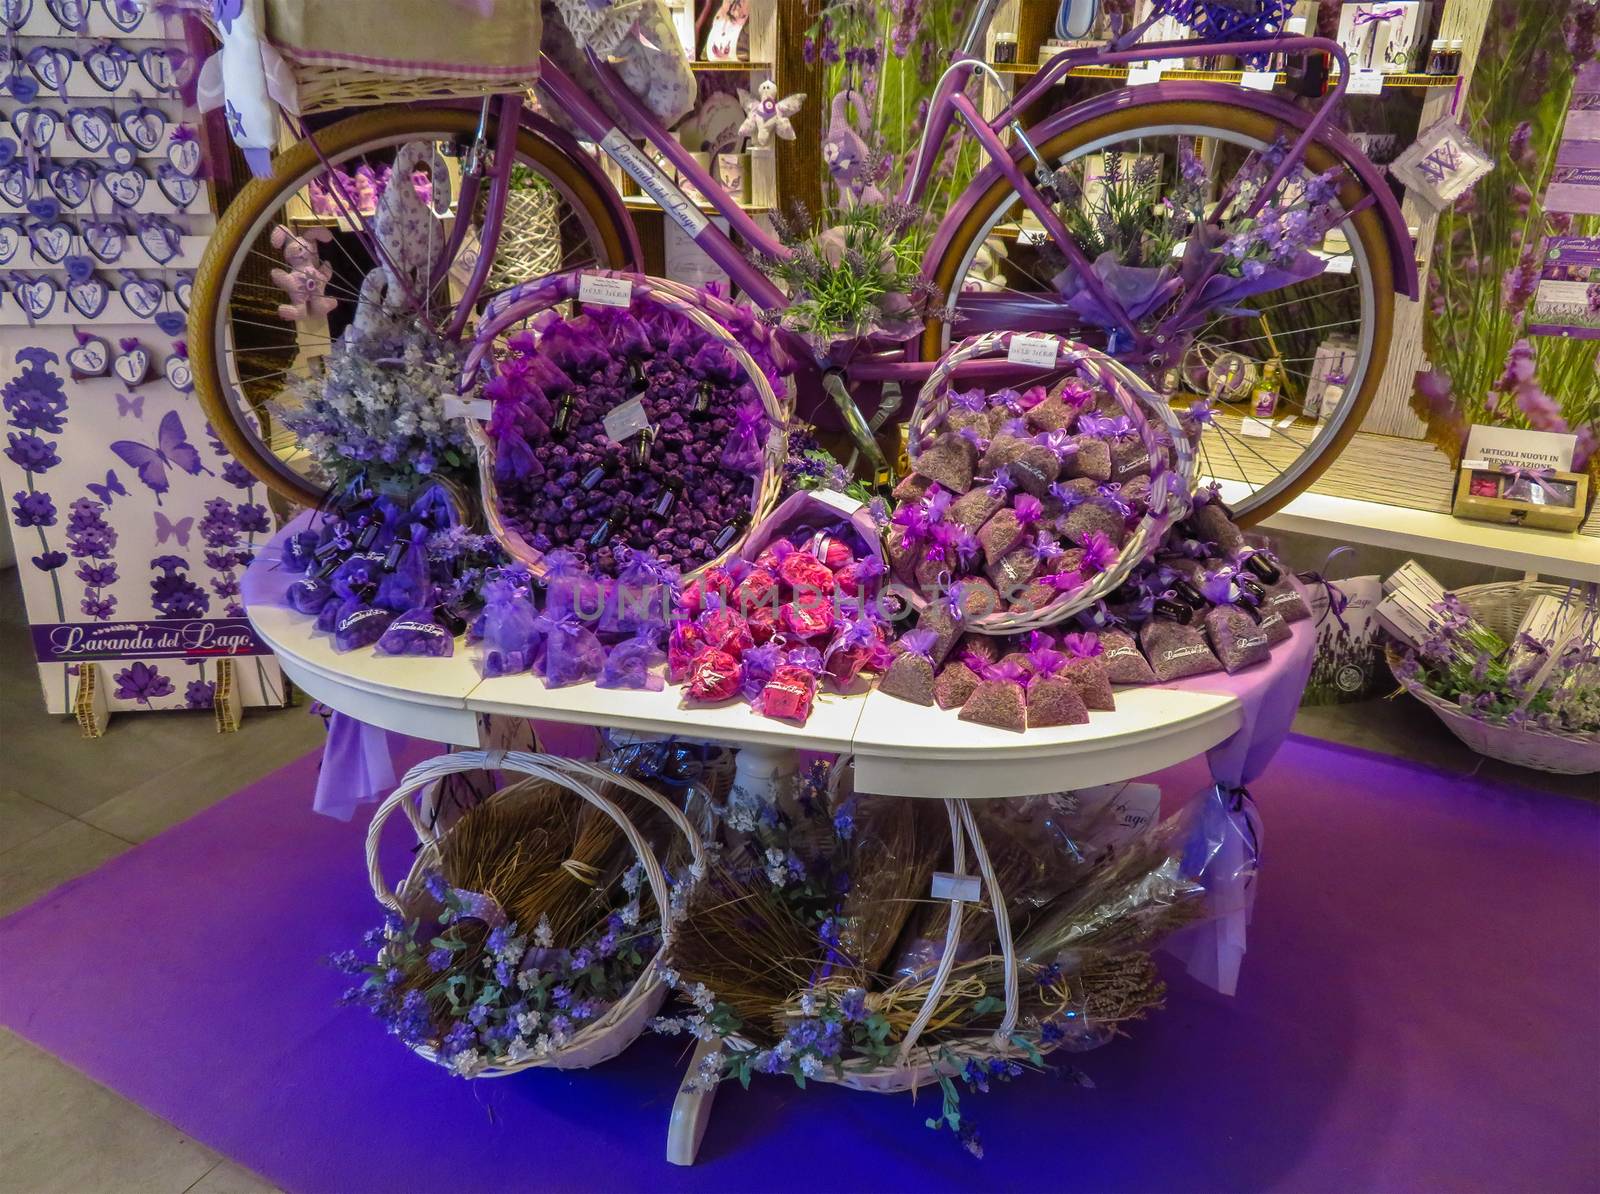 Venice, Italy - June 20, 2017: Lavender souvenirs in a specialized store in Venice, Italy.